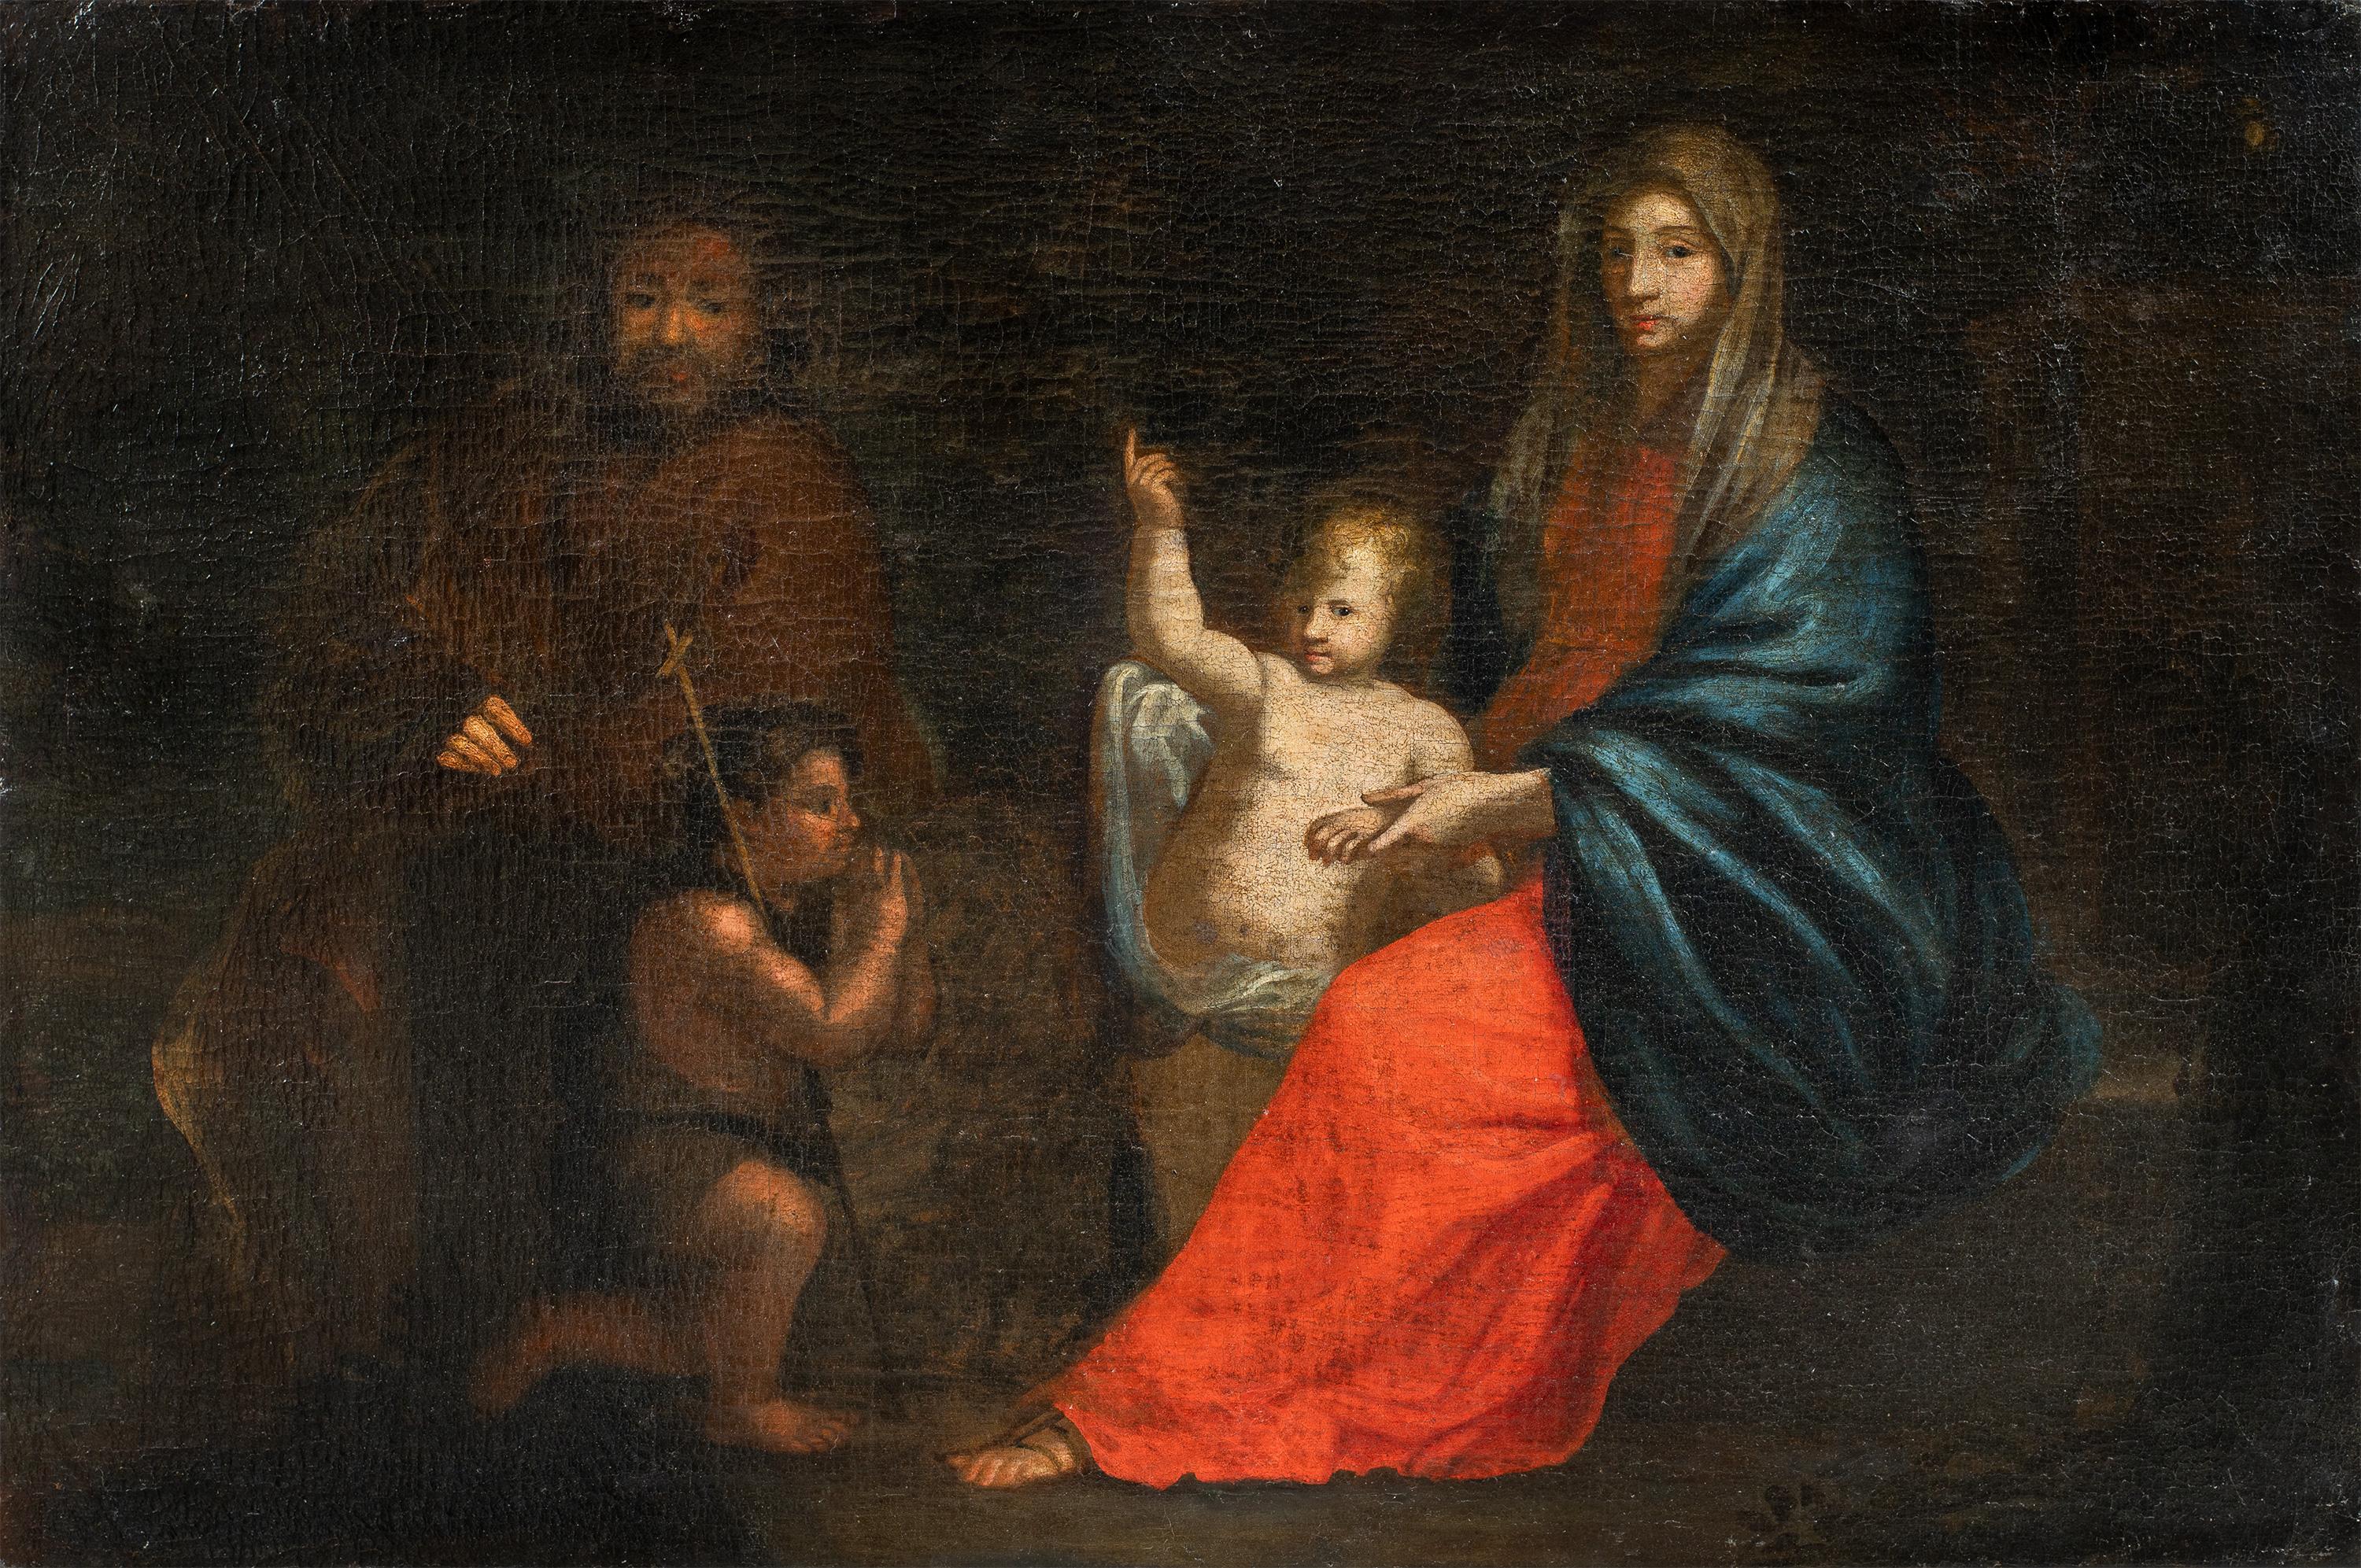 Unknown Figurative Painting - Baroque Italian painter - 17th century figure painting - Holy Family - Virgin